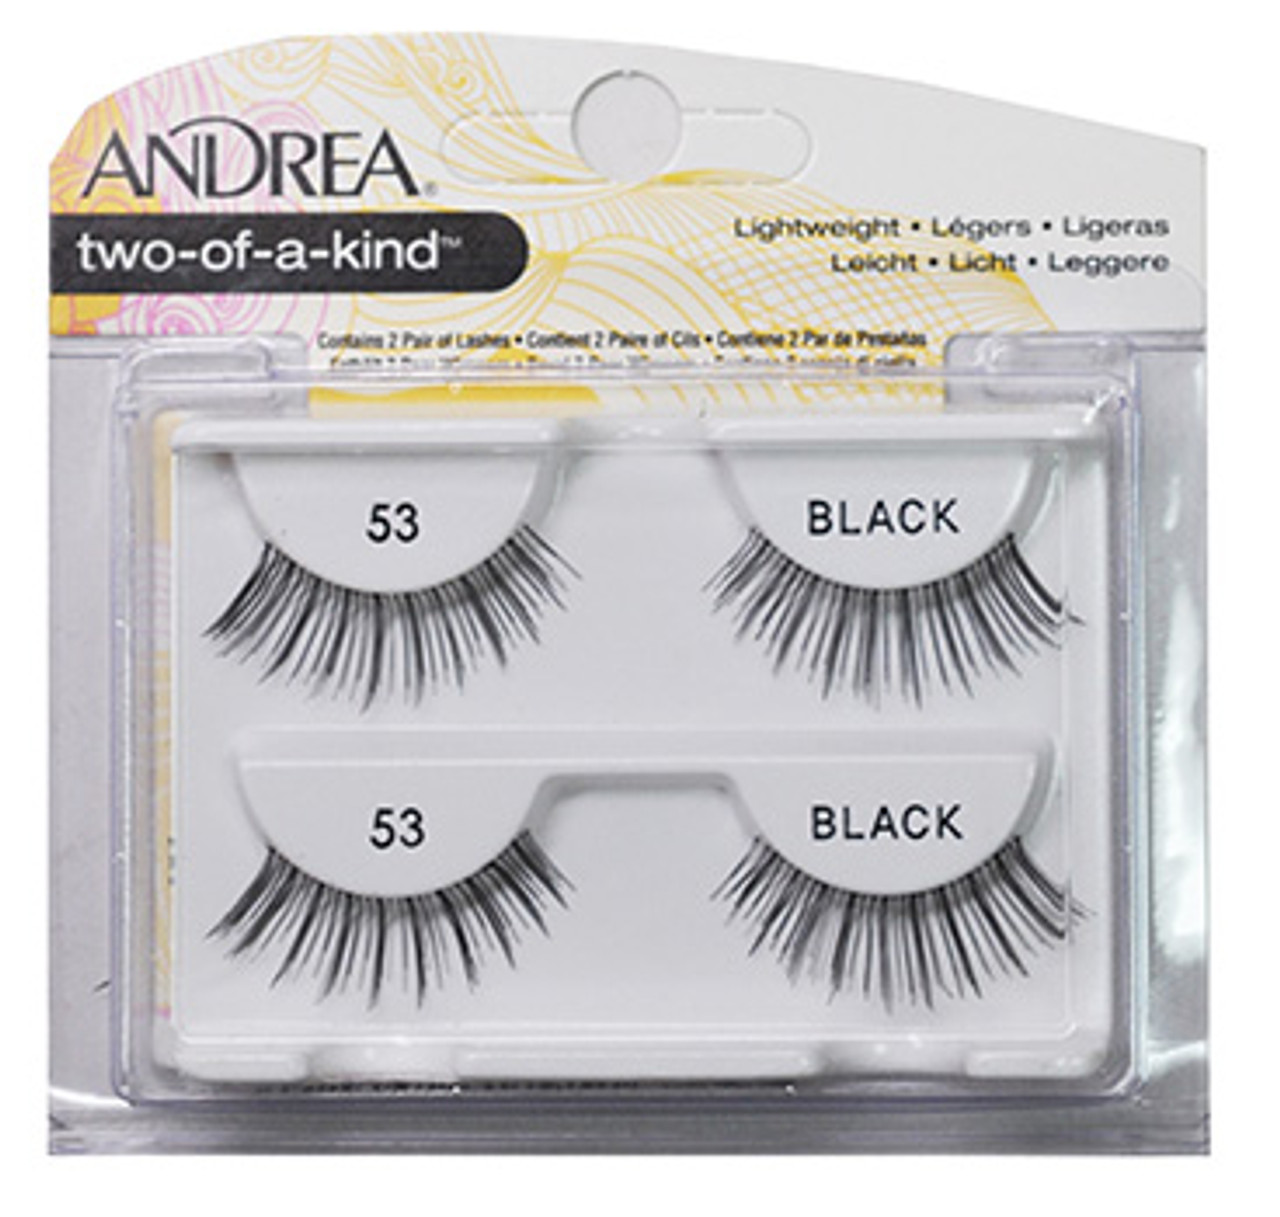 Andrea Two-of-a-Kind 53 Black